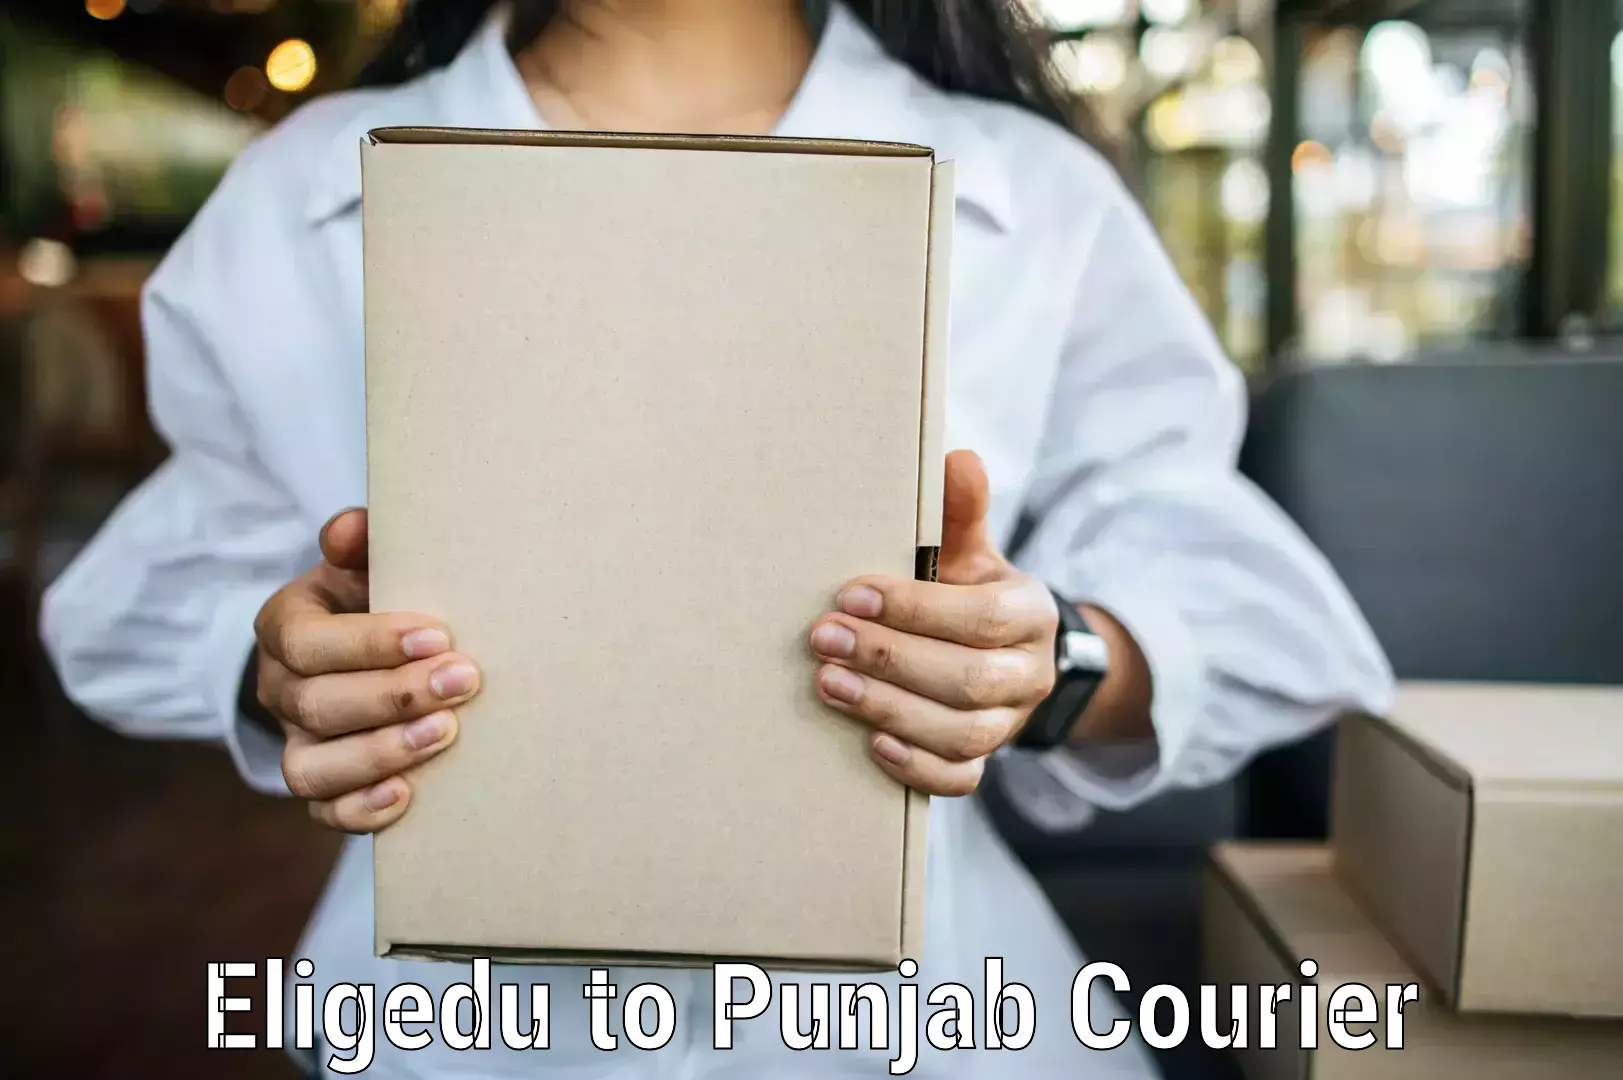 Cost-effective courier options Eligedu to Punjab